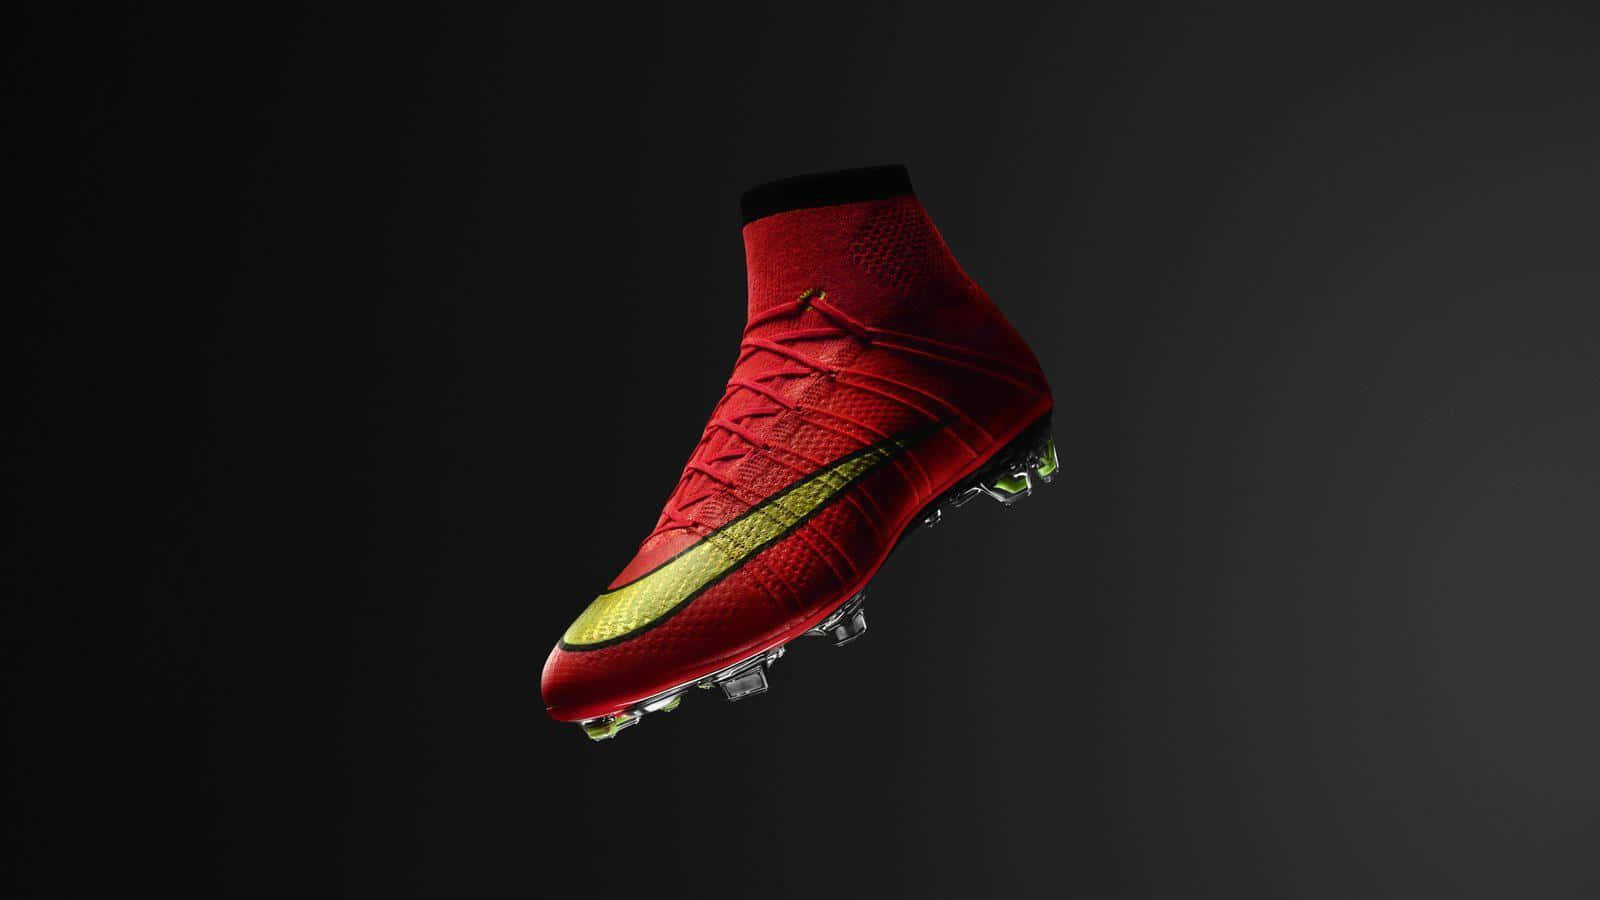 Red High Top Soccer Cleat Wallpaper